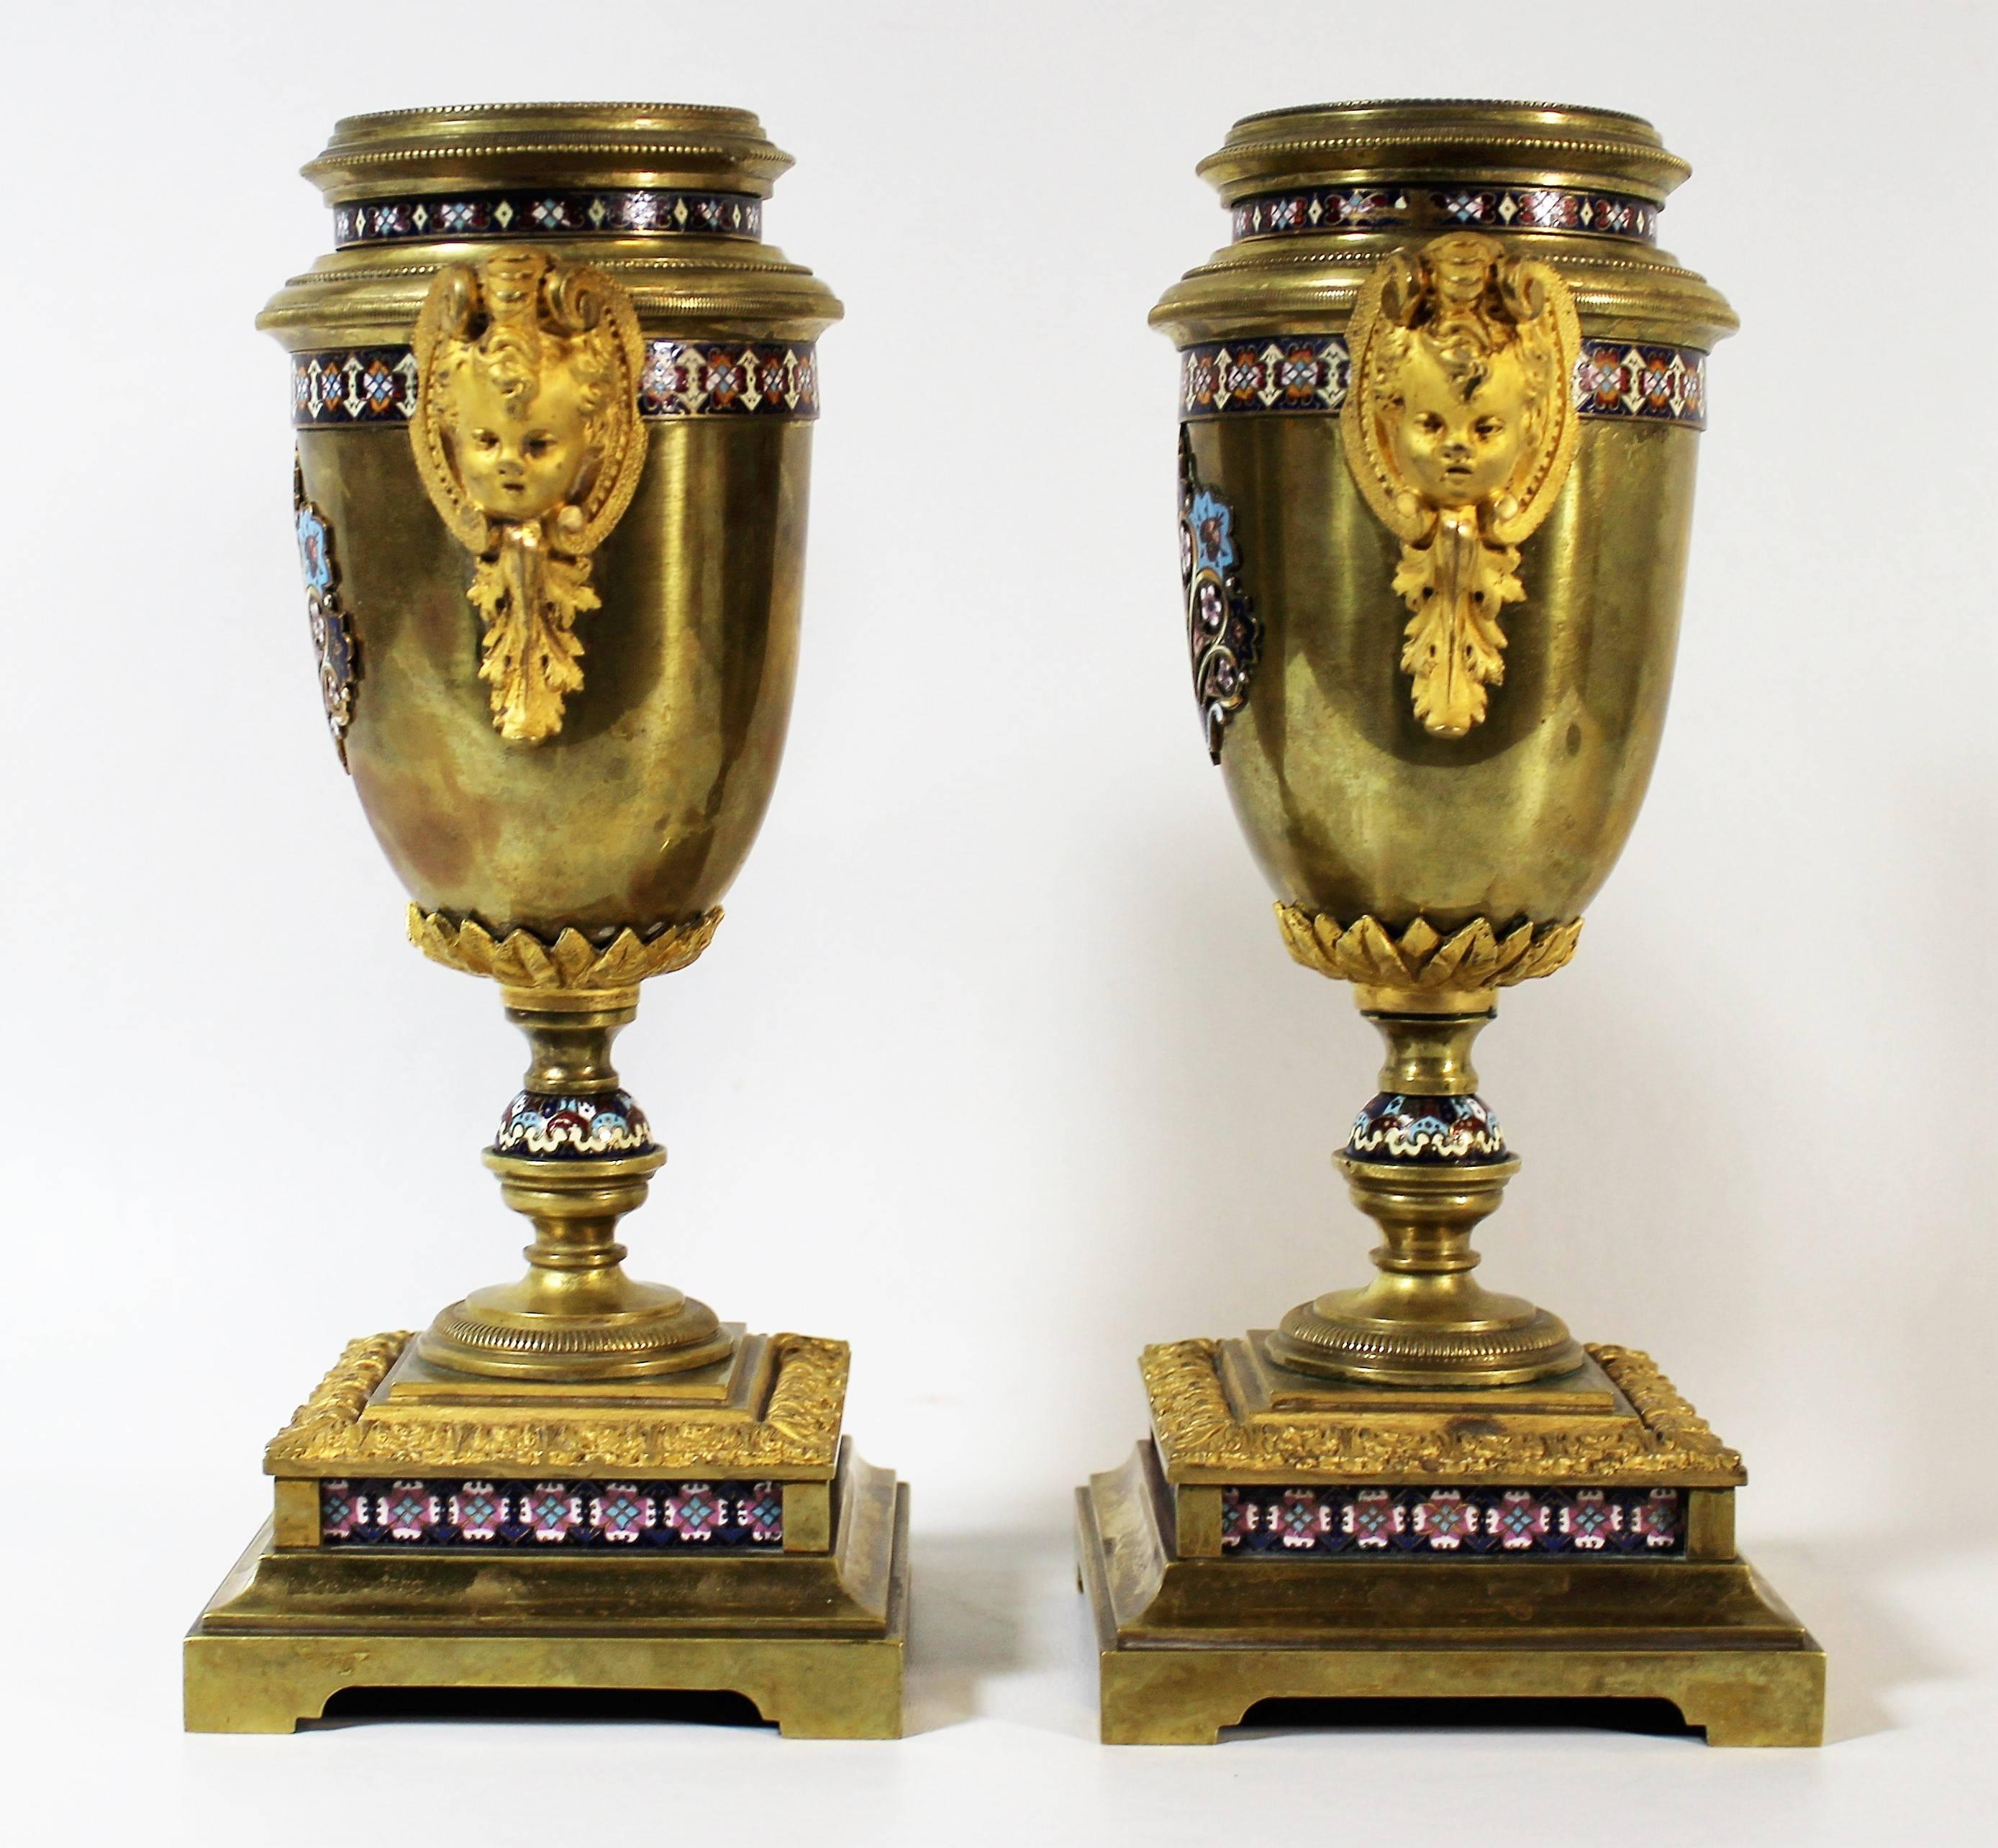 Neoclassical  Pair of 19th Century French Gilt Bronze and Champleve Enamel Urns For Sale